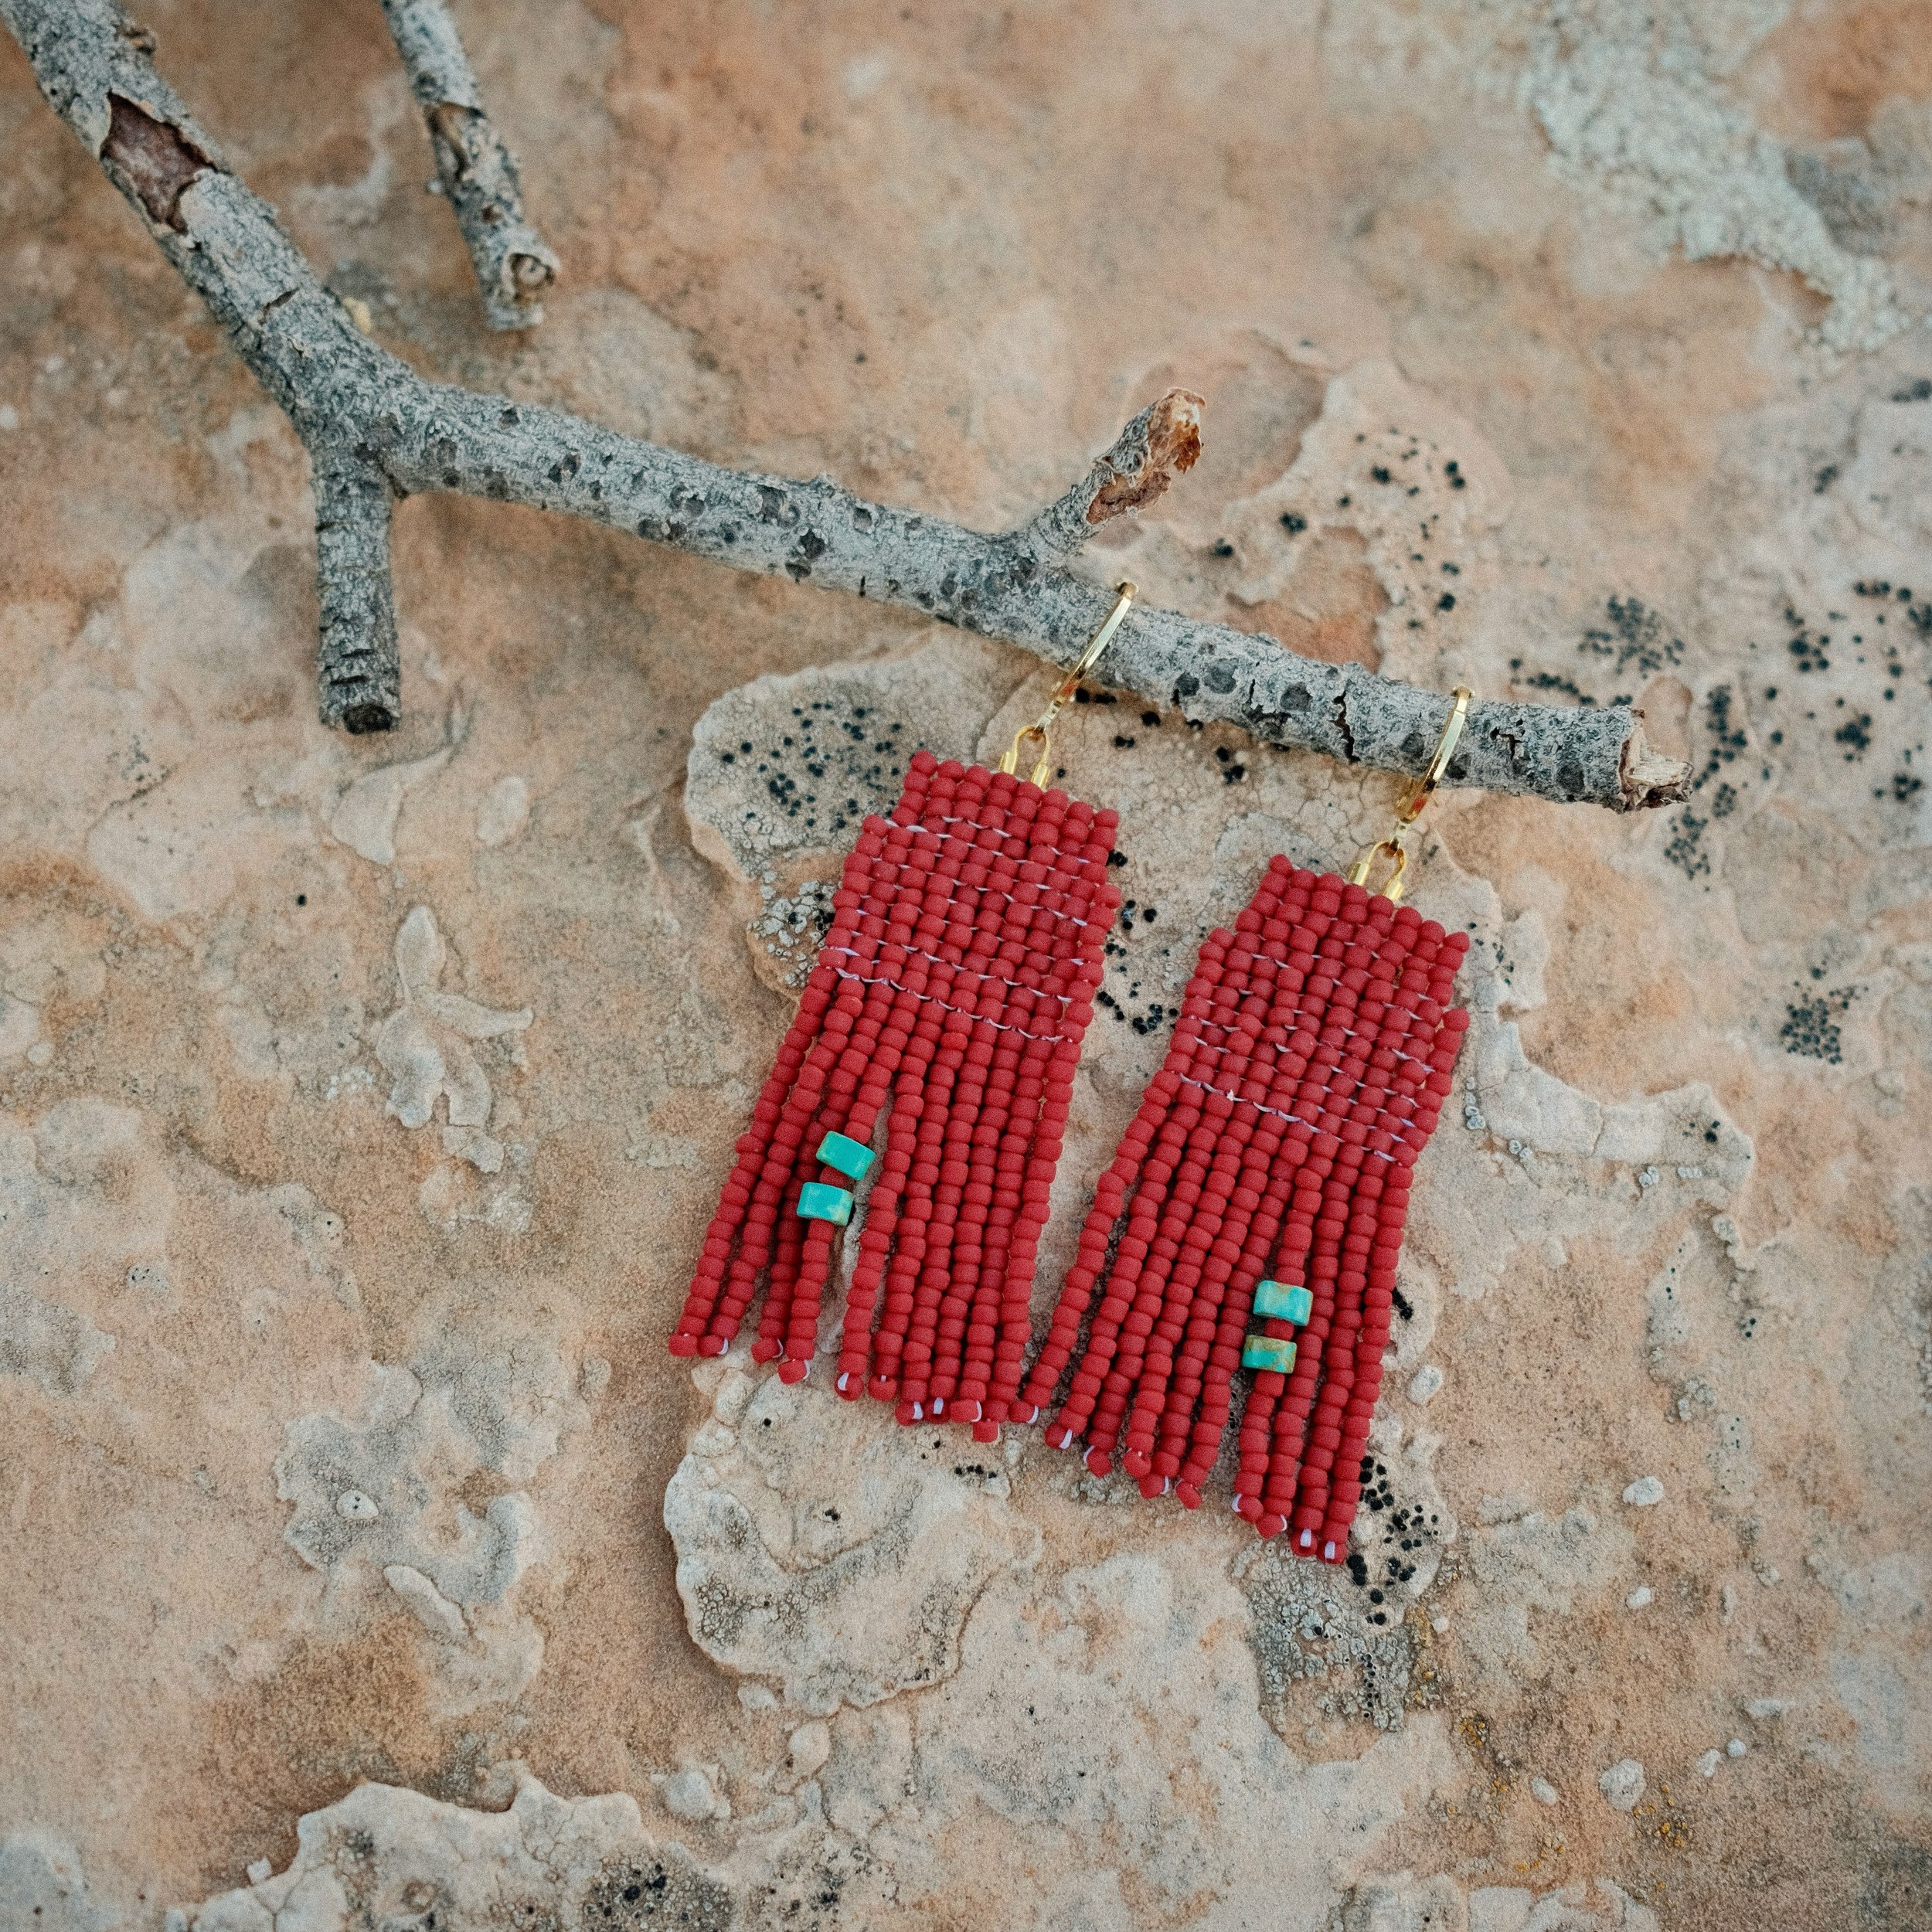 🏜️ for that desert vibe anywhere ❤️

#handmade #handmadejewelry #seedbeads #seedbeadjewelry #seadbeadearrings #handmadeearrings #madeinutah #desertinspired #turquoise